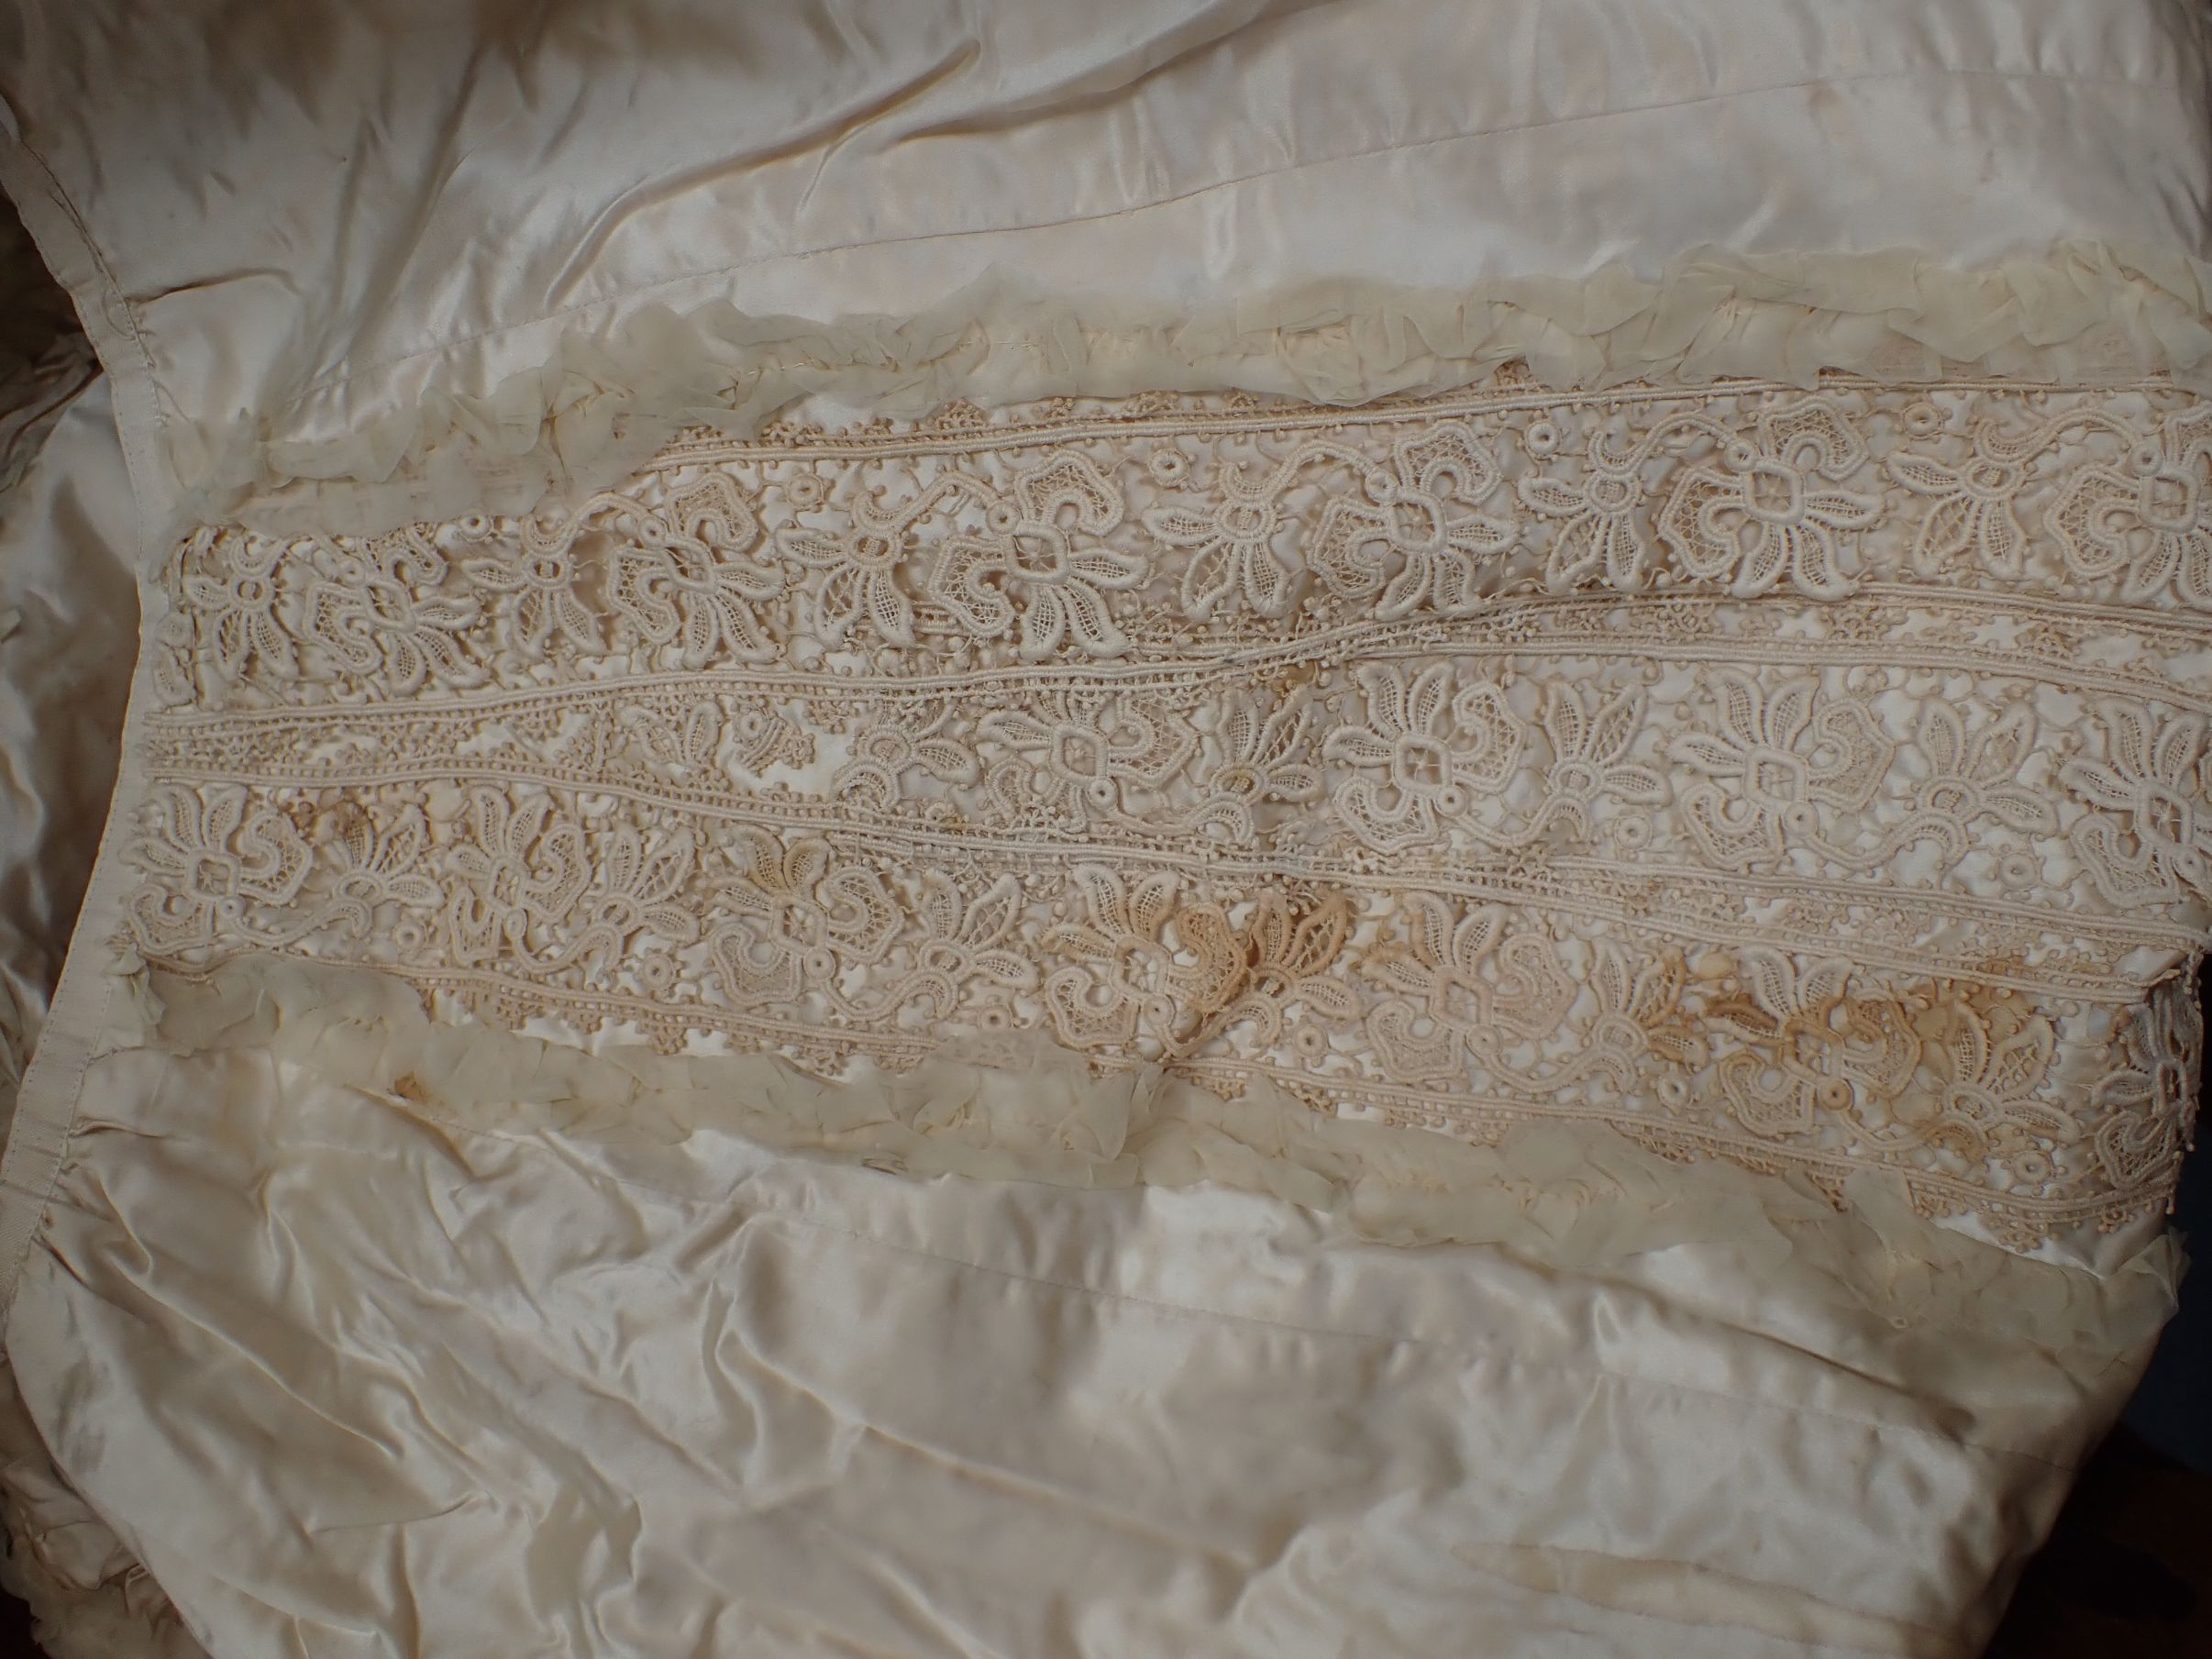 A LATE VICTORIAN SILK WEDDING DRESS, WITH LACE COLLAR AND PANELS - Image 10 of 11